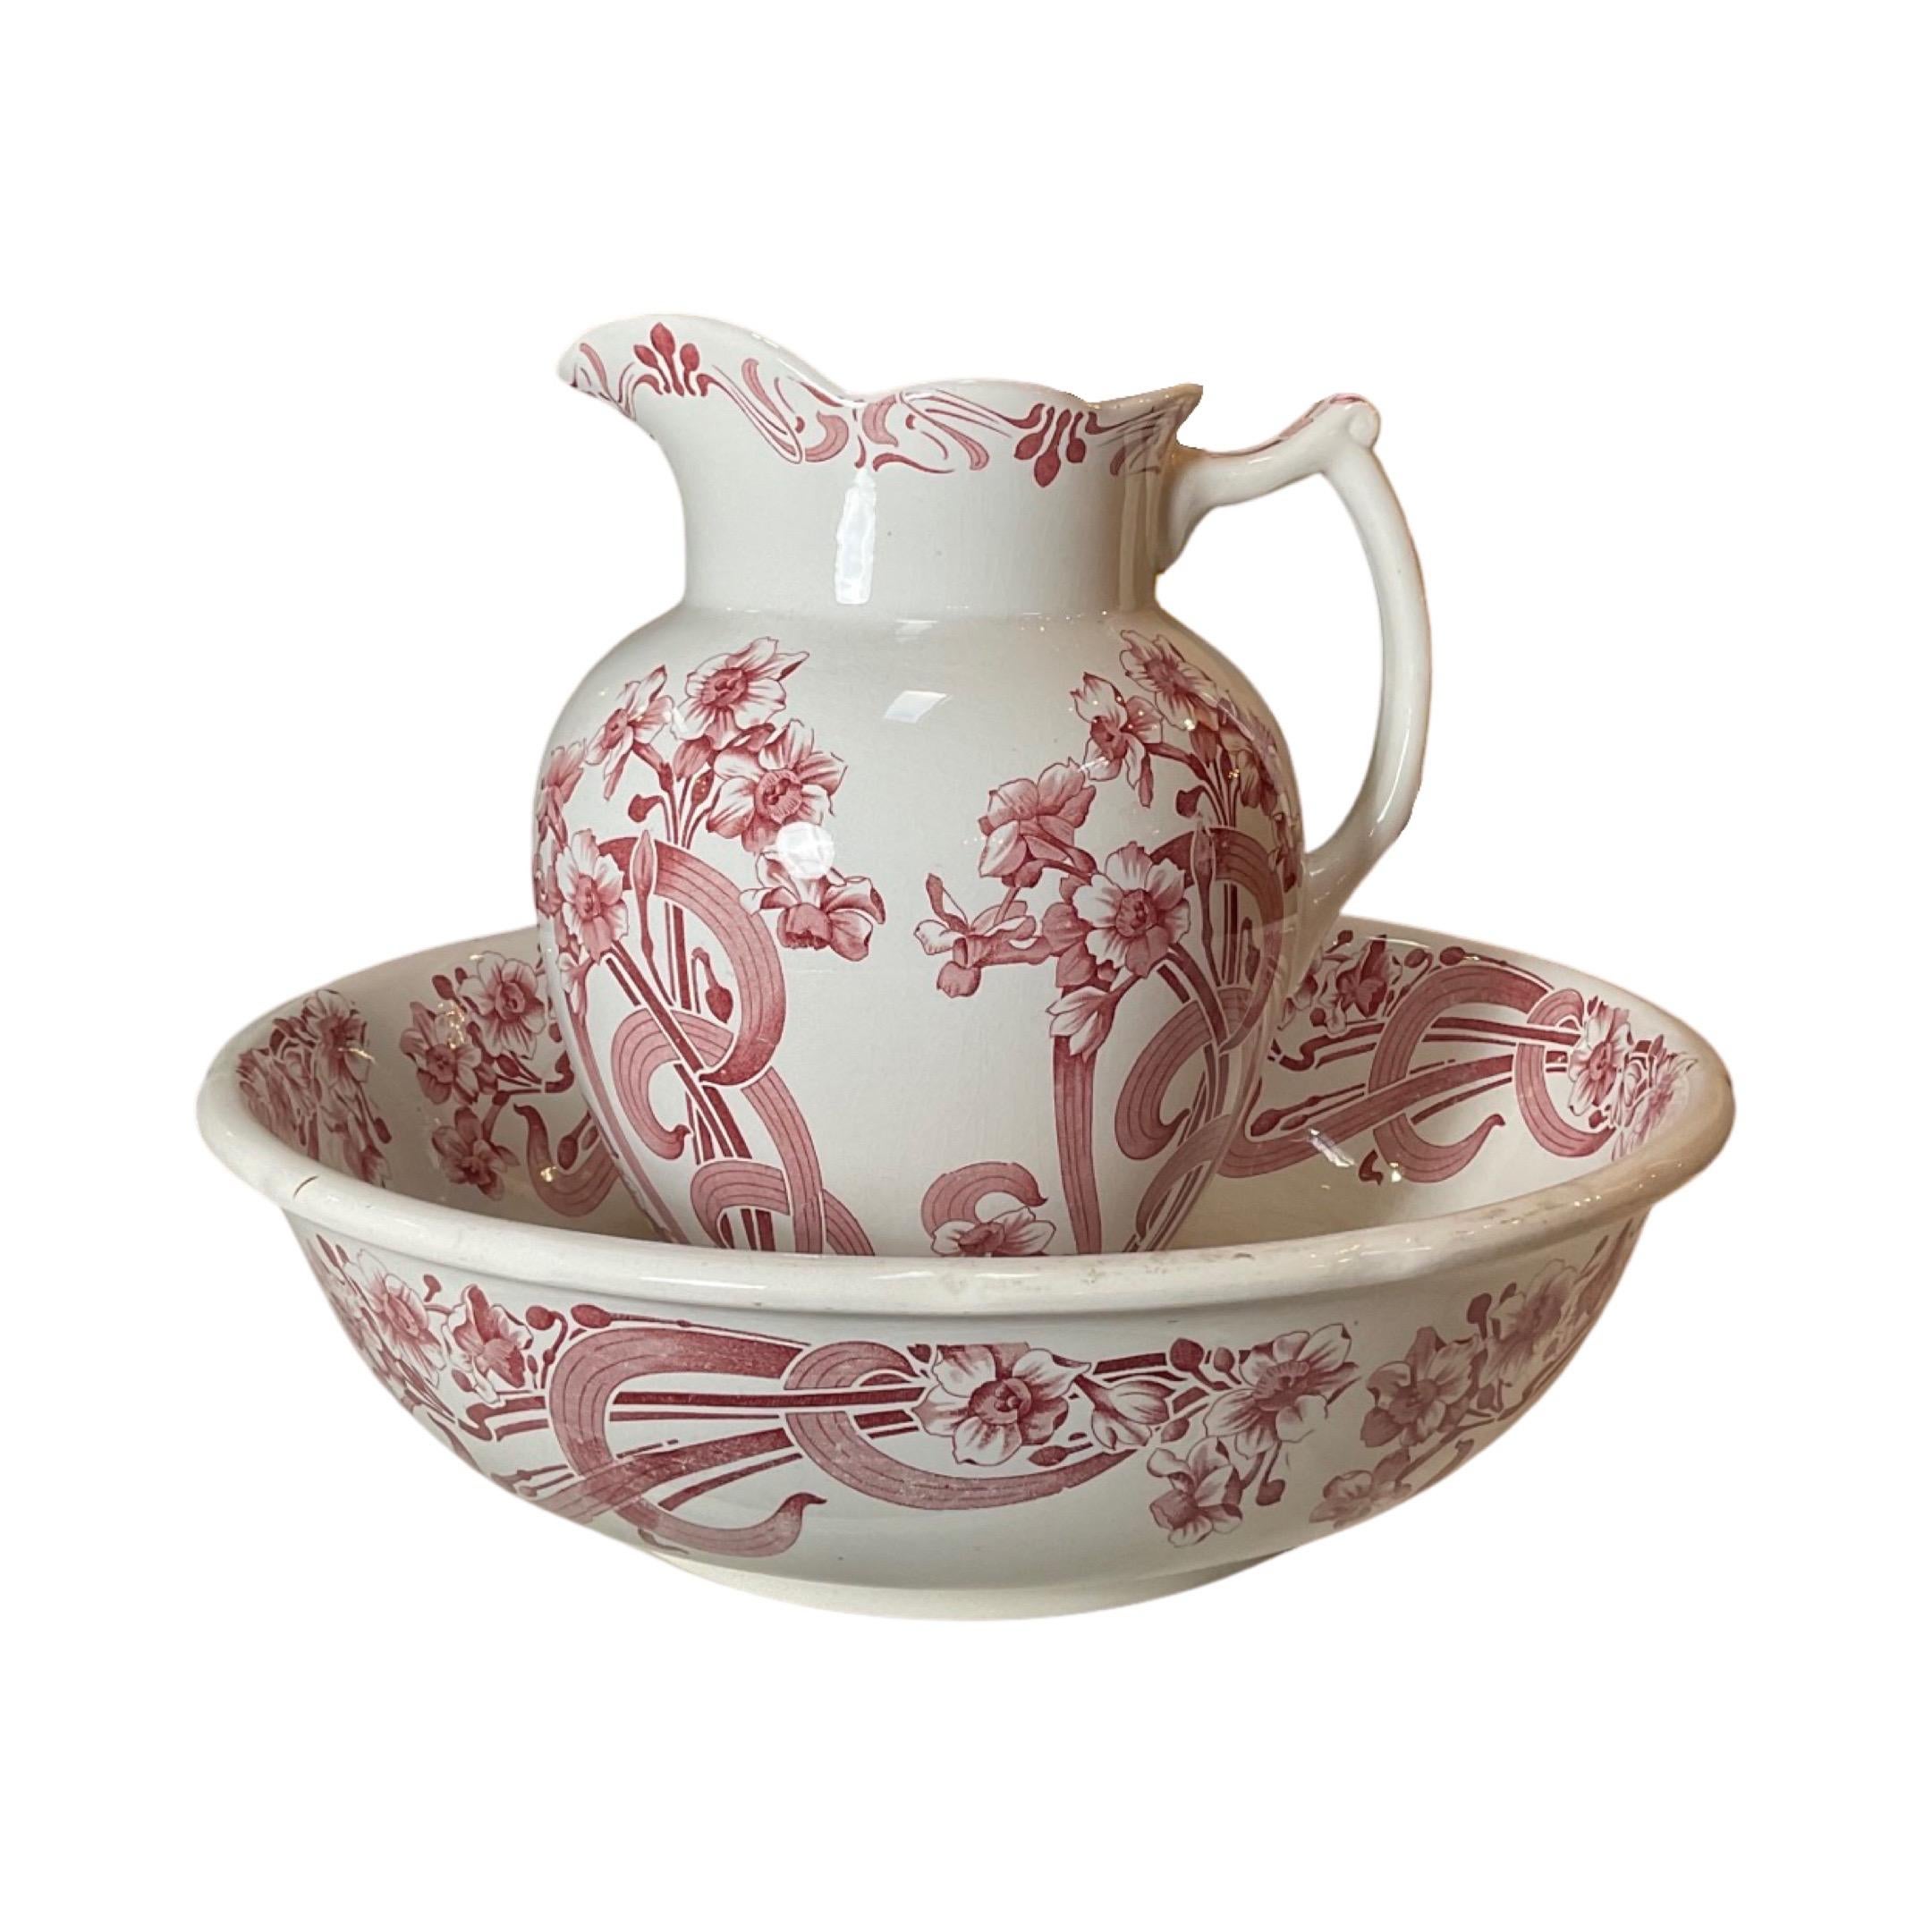 Enhance your collection with this stunning 19th century English Antique Porcelain set. Featuring delicate floral prints, this 2 piece set includes a pitcher and bowl, perfect for showcasing your refined taste. Crafted with intricate detail, this set